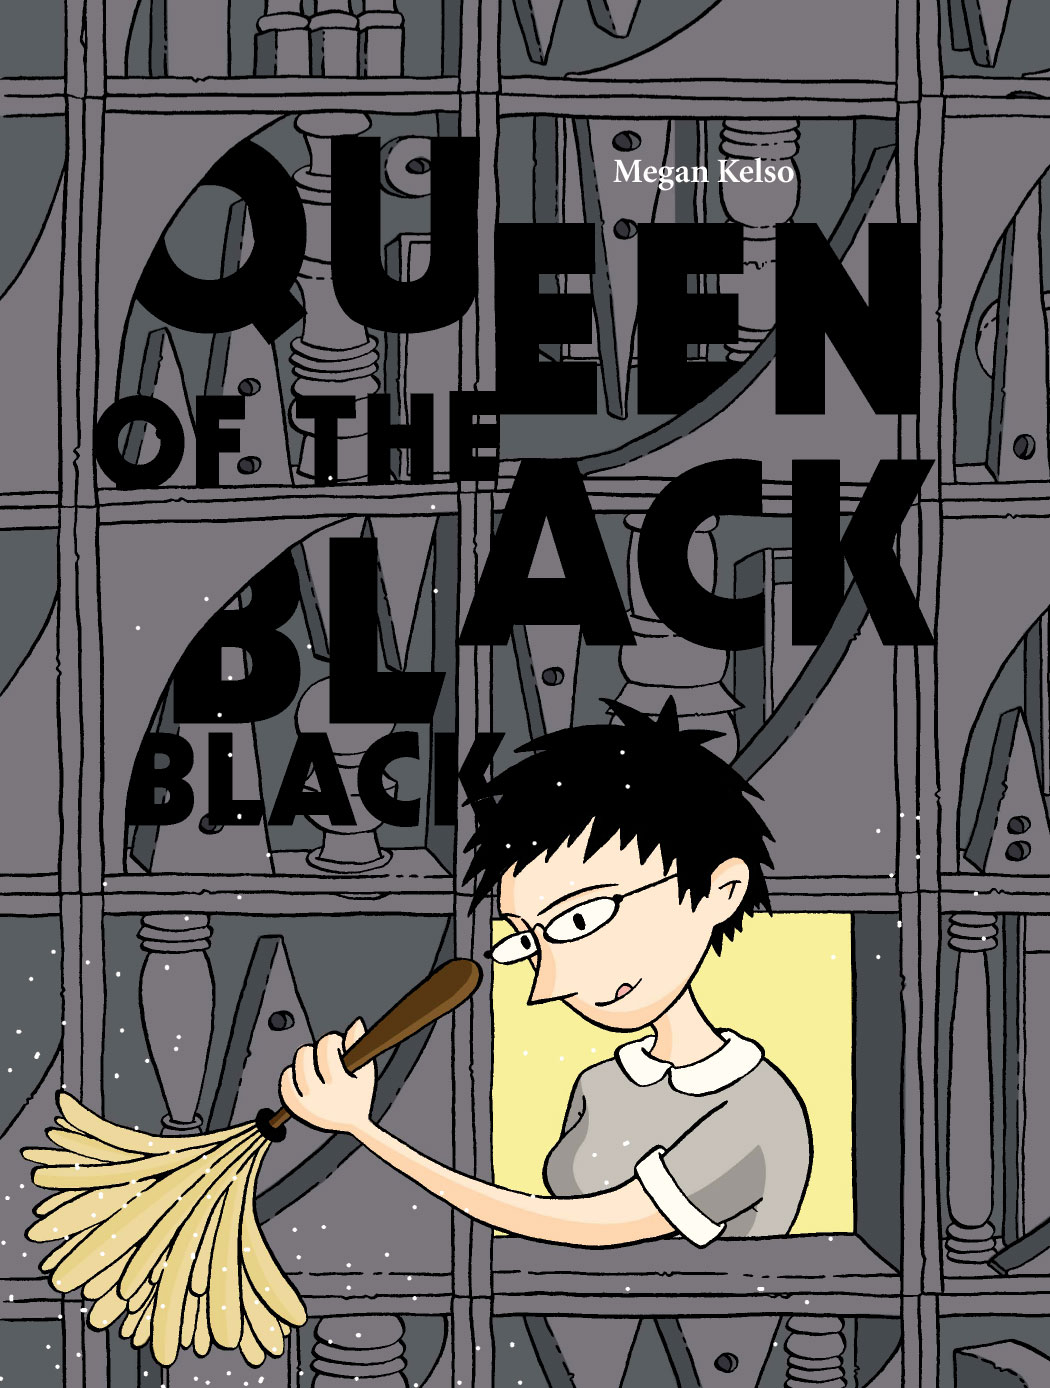 Queen of the Black Black Graphic Novel